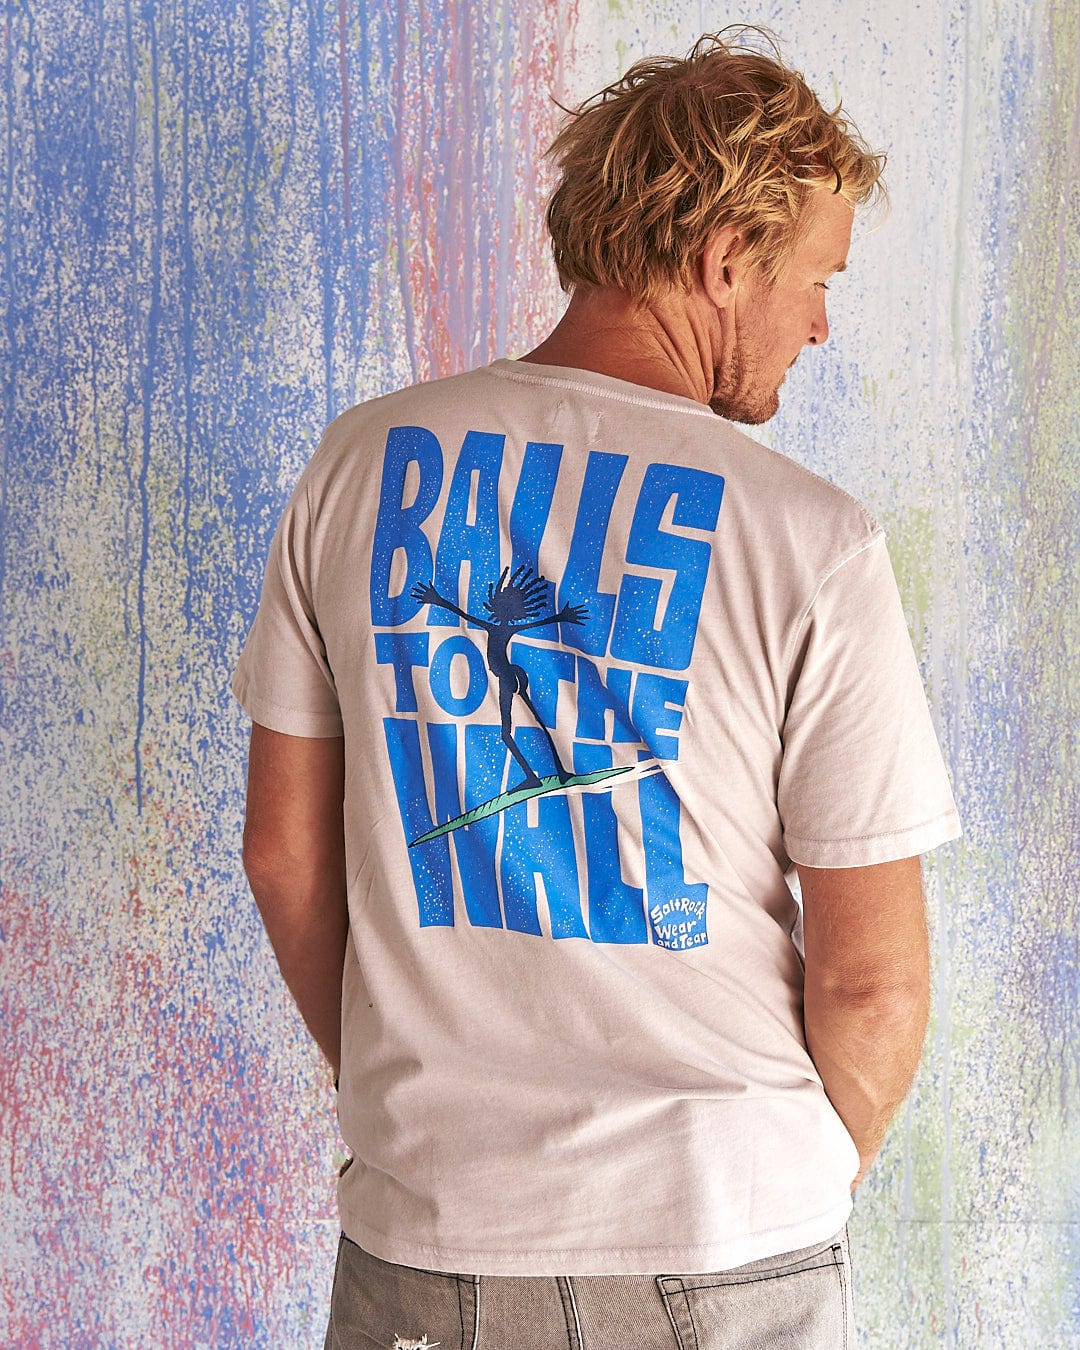 A man wearing a Saltrock t-shirt that says Balls To The Wall - Limited Edition 35 Years T-Shirt.